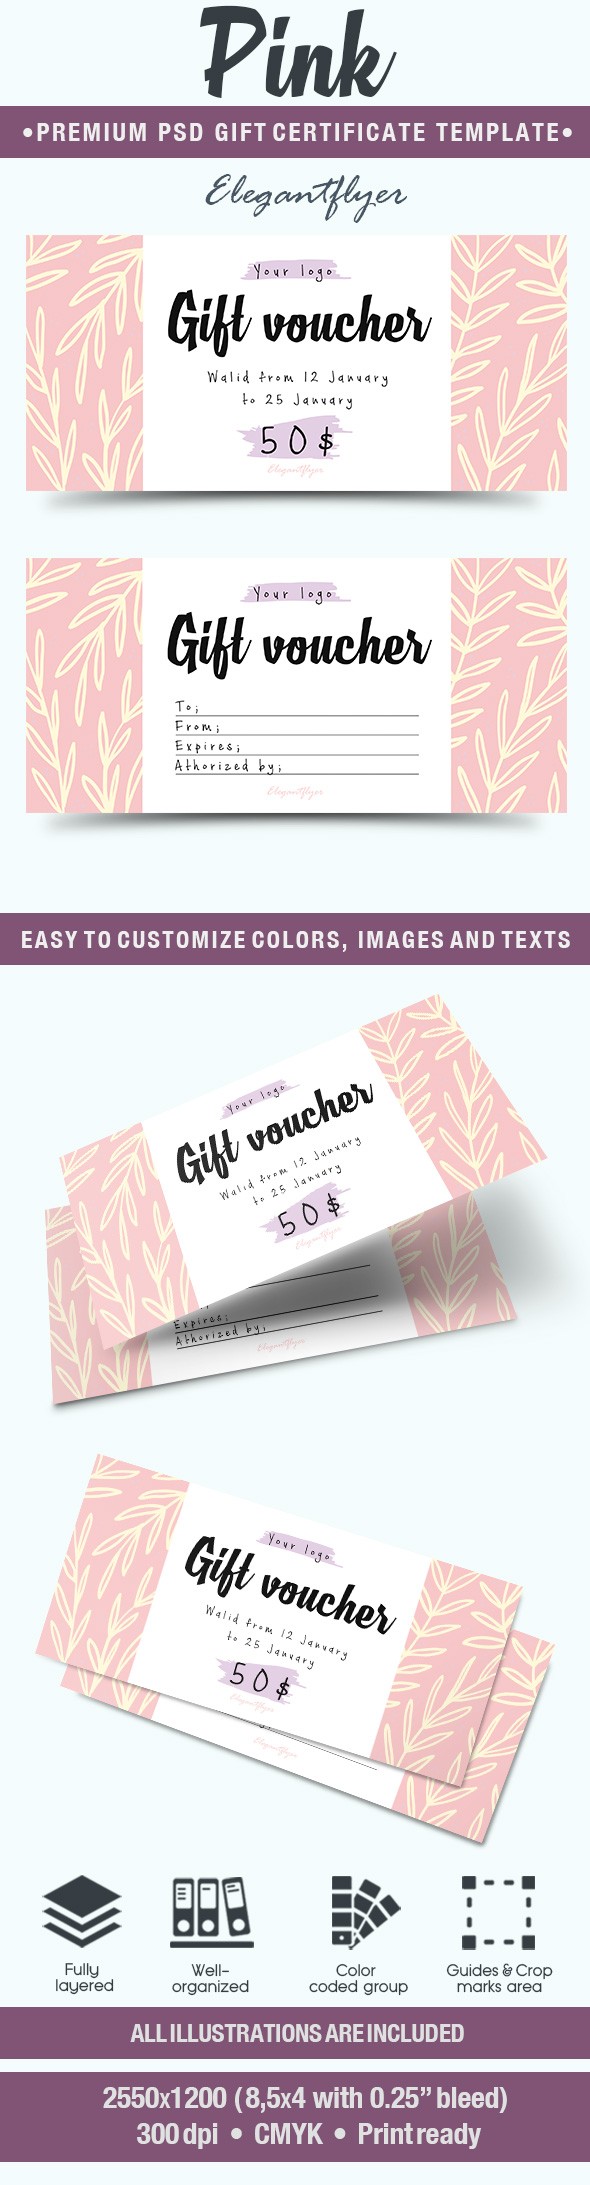 Gift Certificate for Pink Template 10021132 by ElegantFlyer